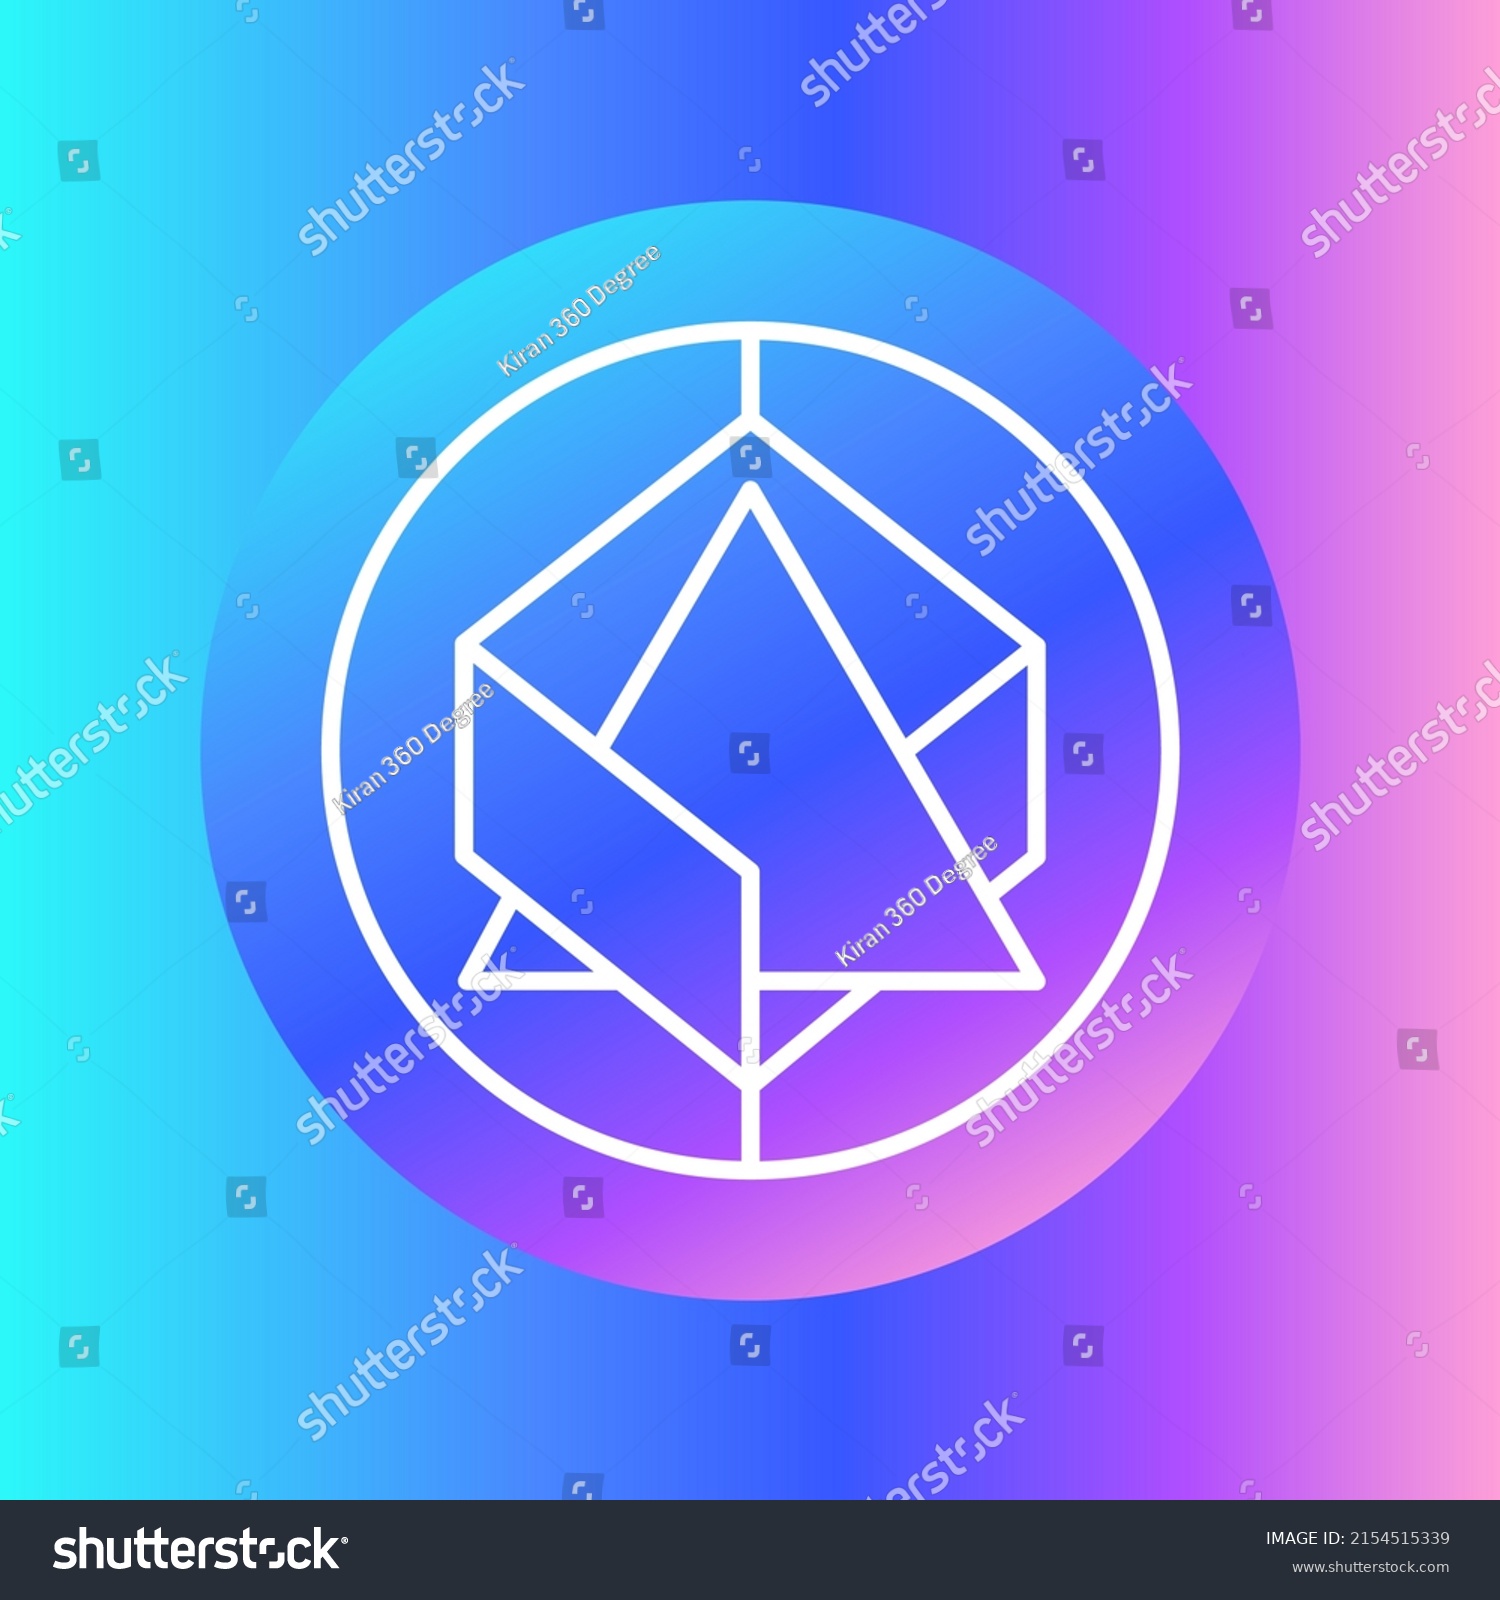 SVG of Alchemix (ALCX) Crypto coin logo and symbol on a gradient background. Creative virtual currency symbol vector illustration svg